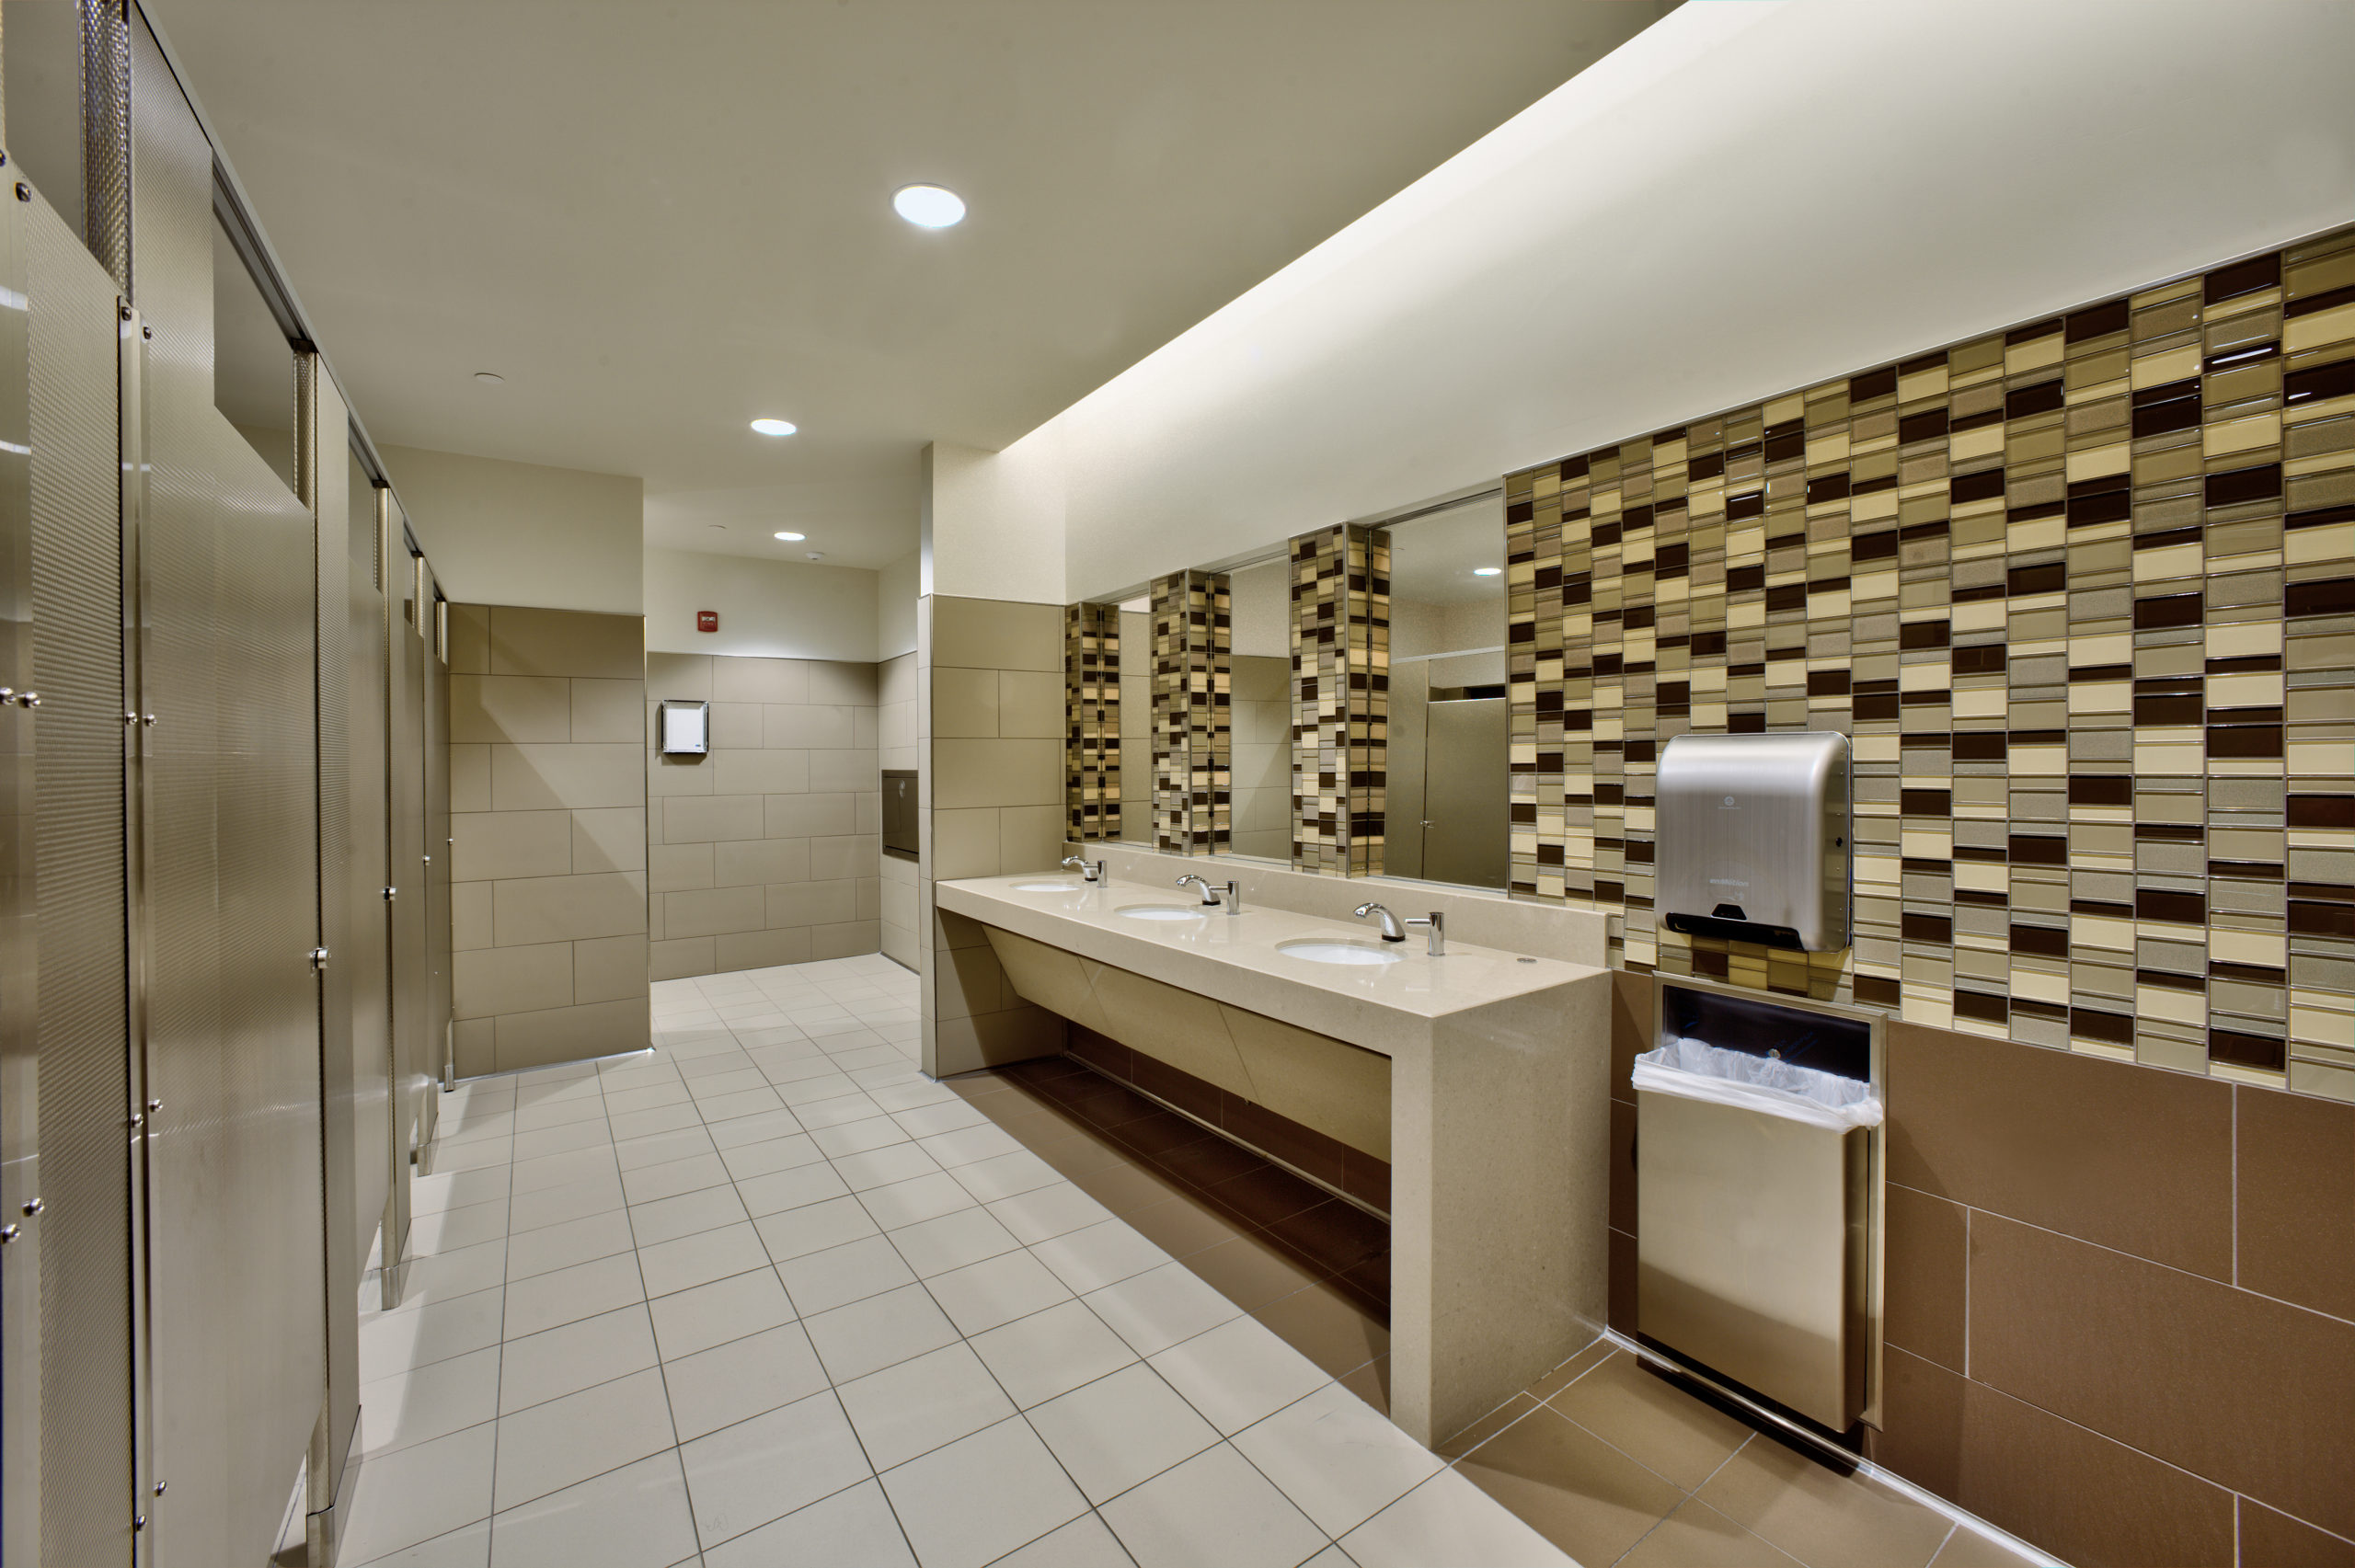 The Arden Fair 2nd Level Restrooms, constructed by Sunseri Associates